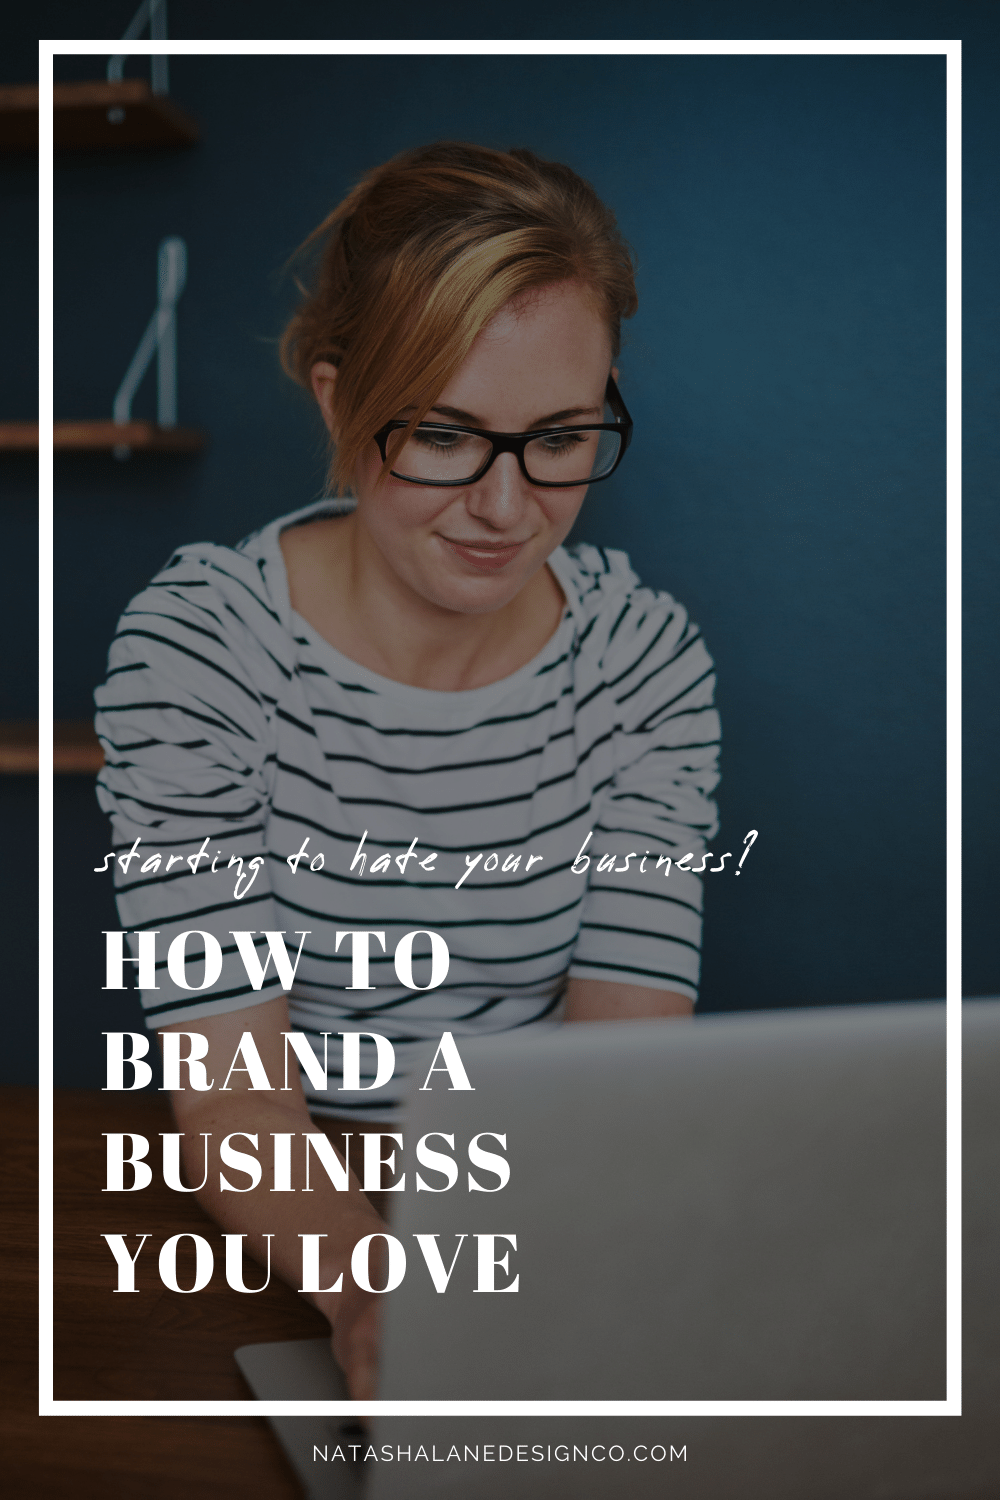 Starting to HATE your business? How to brand a business you love